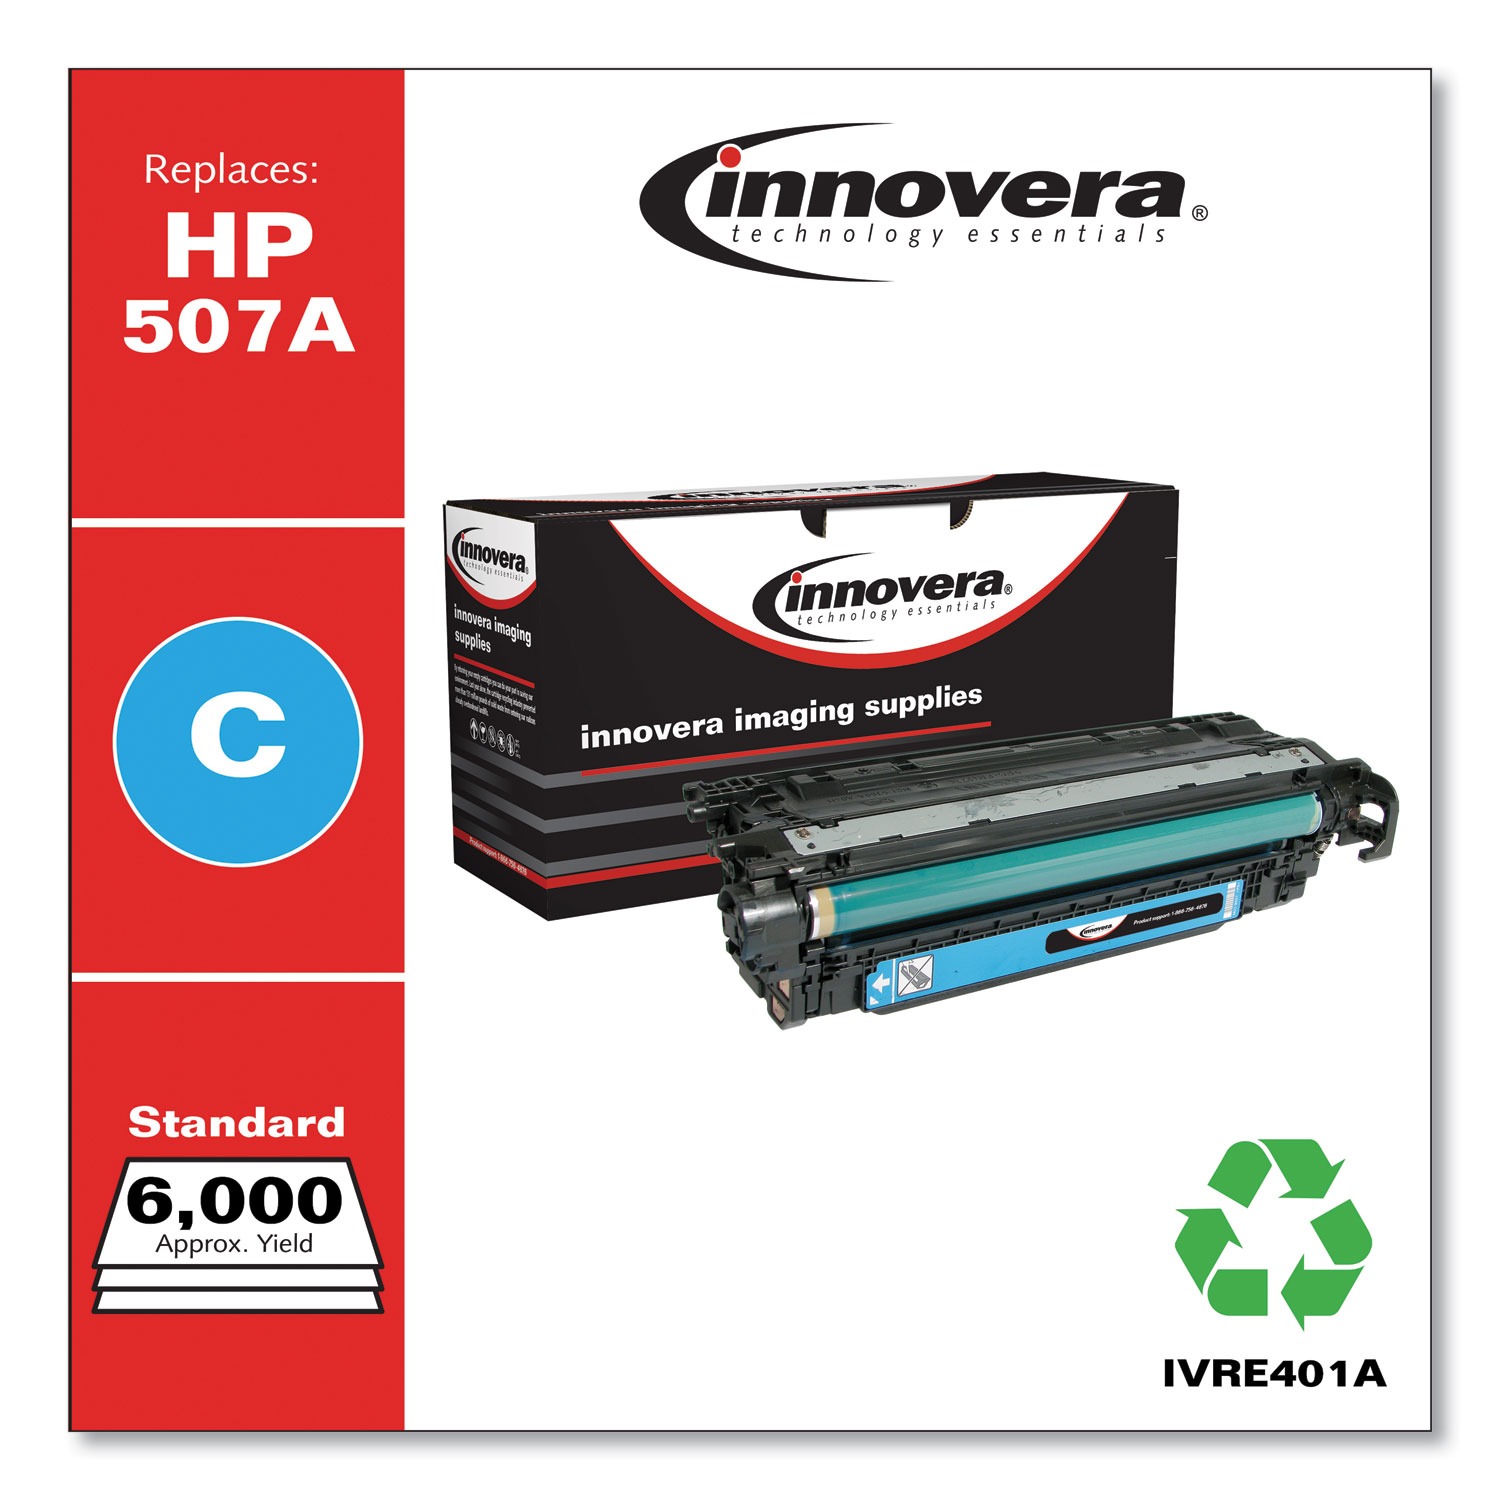  Innovera IVRE401A Remanufactured CE401A (507A) Toner, 6000 Page-Yield, Cyan (IVRE401A) 